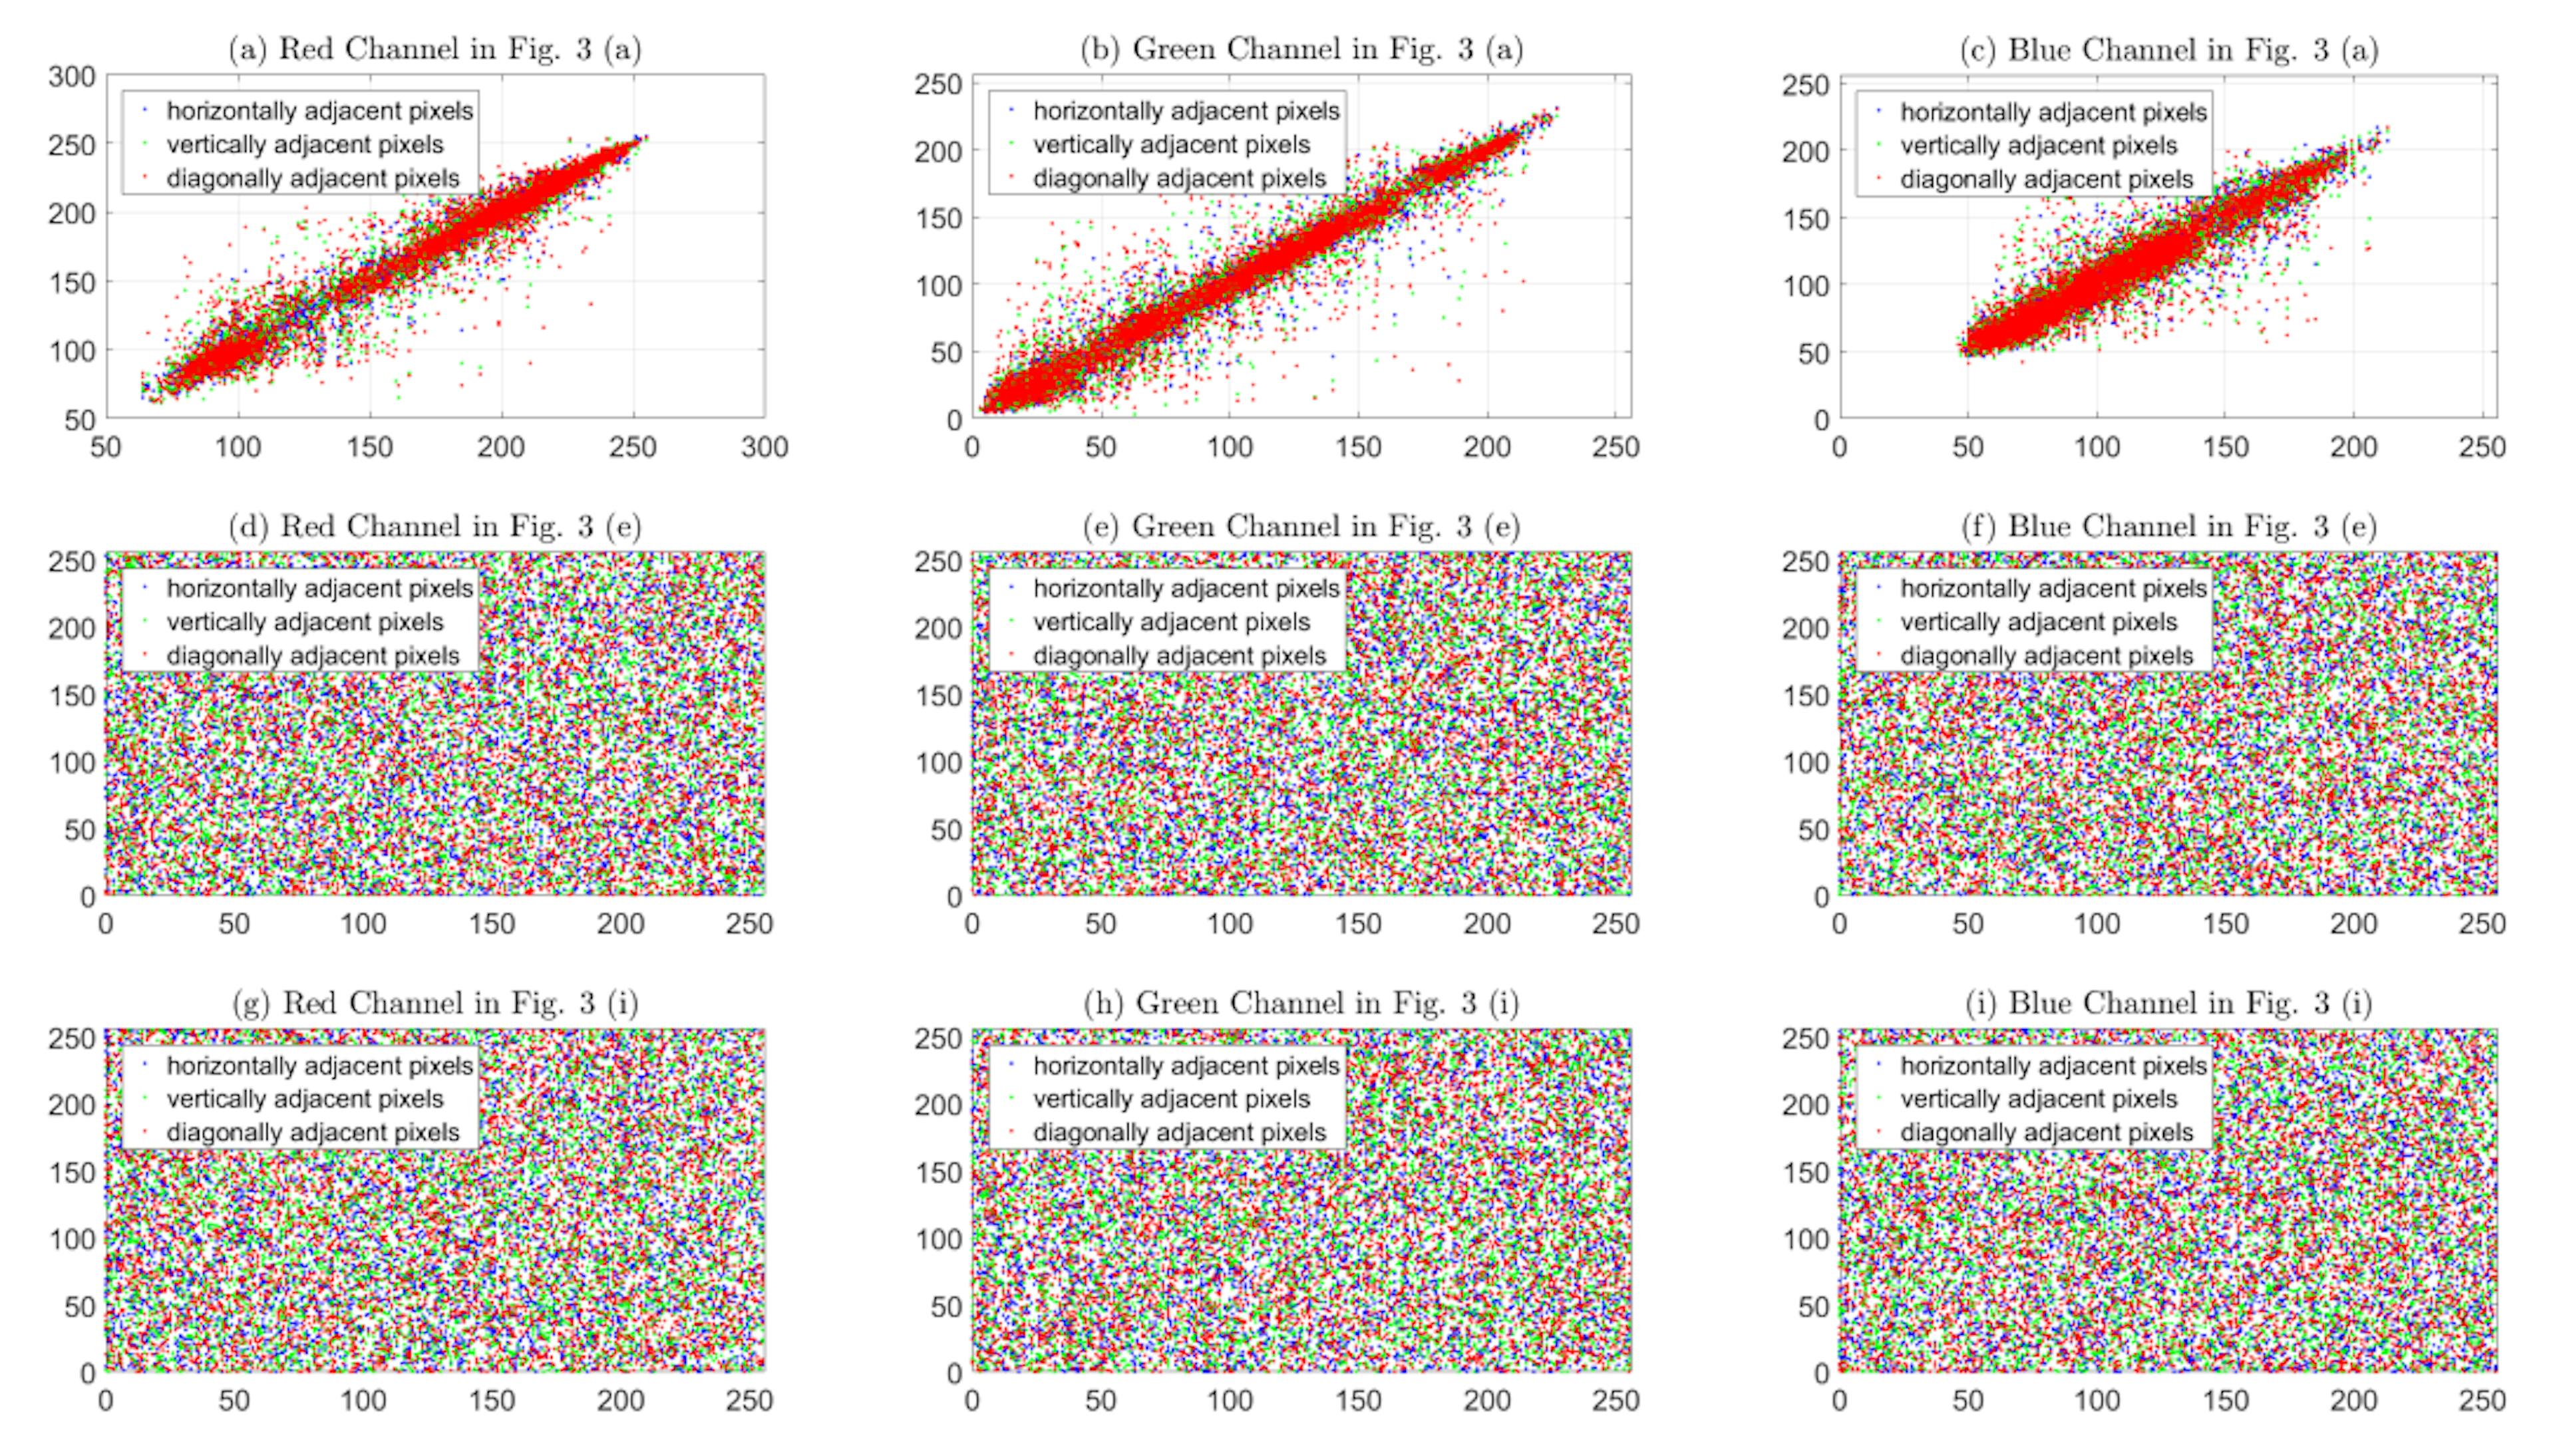 Figure 4: Correlation distribution of two adjacent pixels in horizontal, vertical, and diagonal directions, (a) - (c) correlation distribution of red, green, and blue channels in plain image, (d) - (f) correlation distribution of red, green, and blue channels in cipher image encrypted with PLCM, (g) - (i) correlation distribution of red, green, and blue channels in cipher image encrypted with 2DLASM.